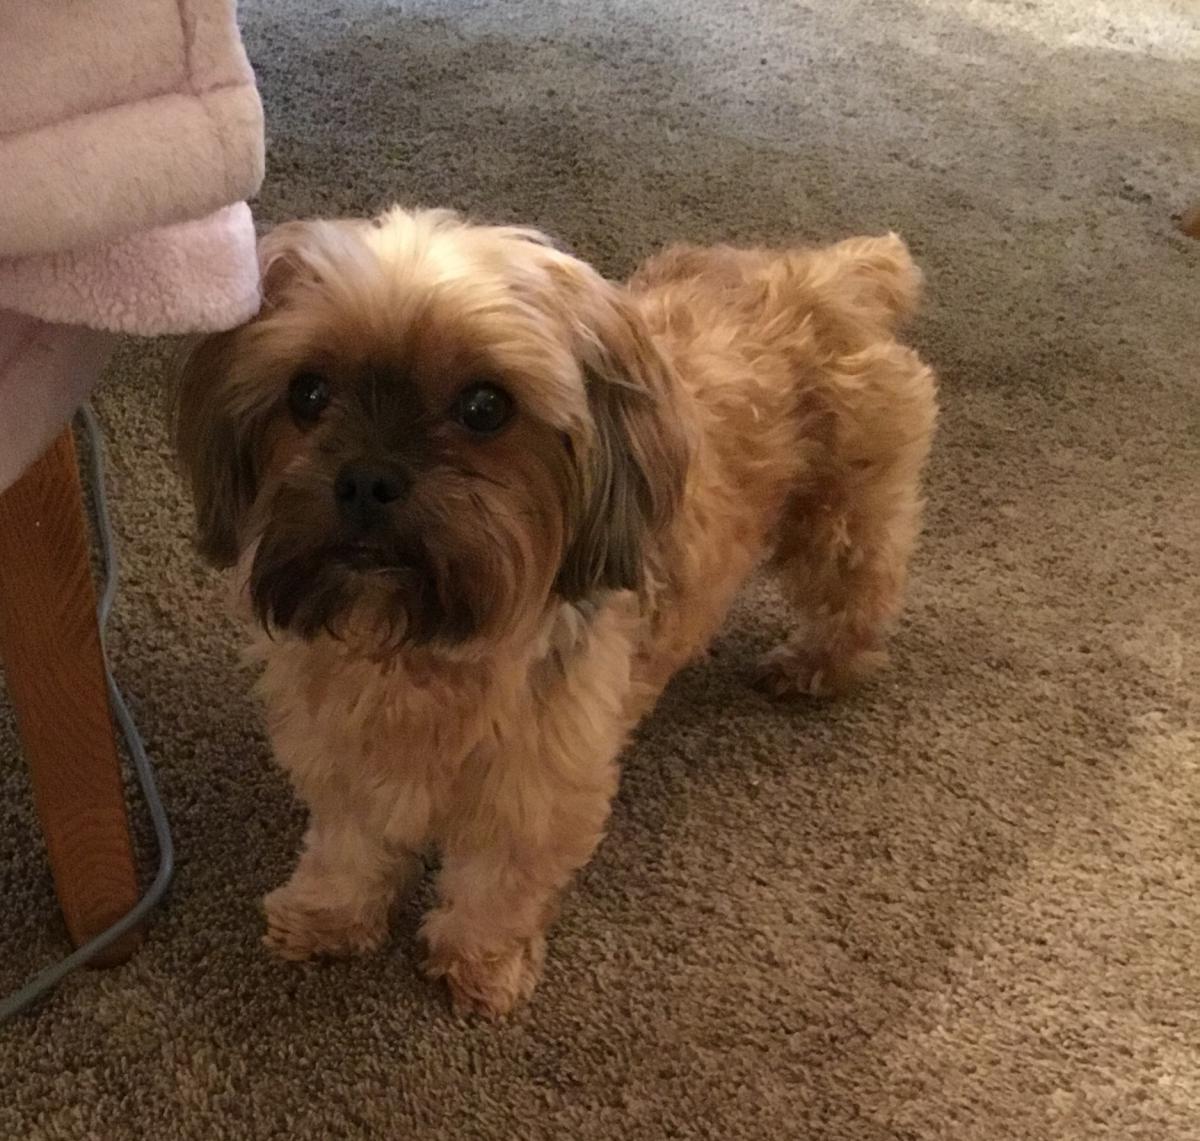 Image of Toto, Lost Dog